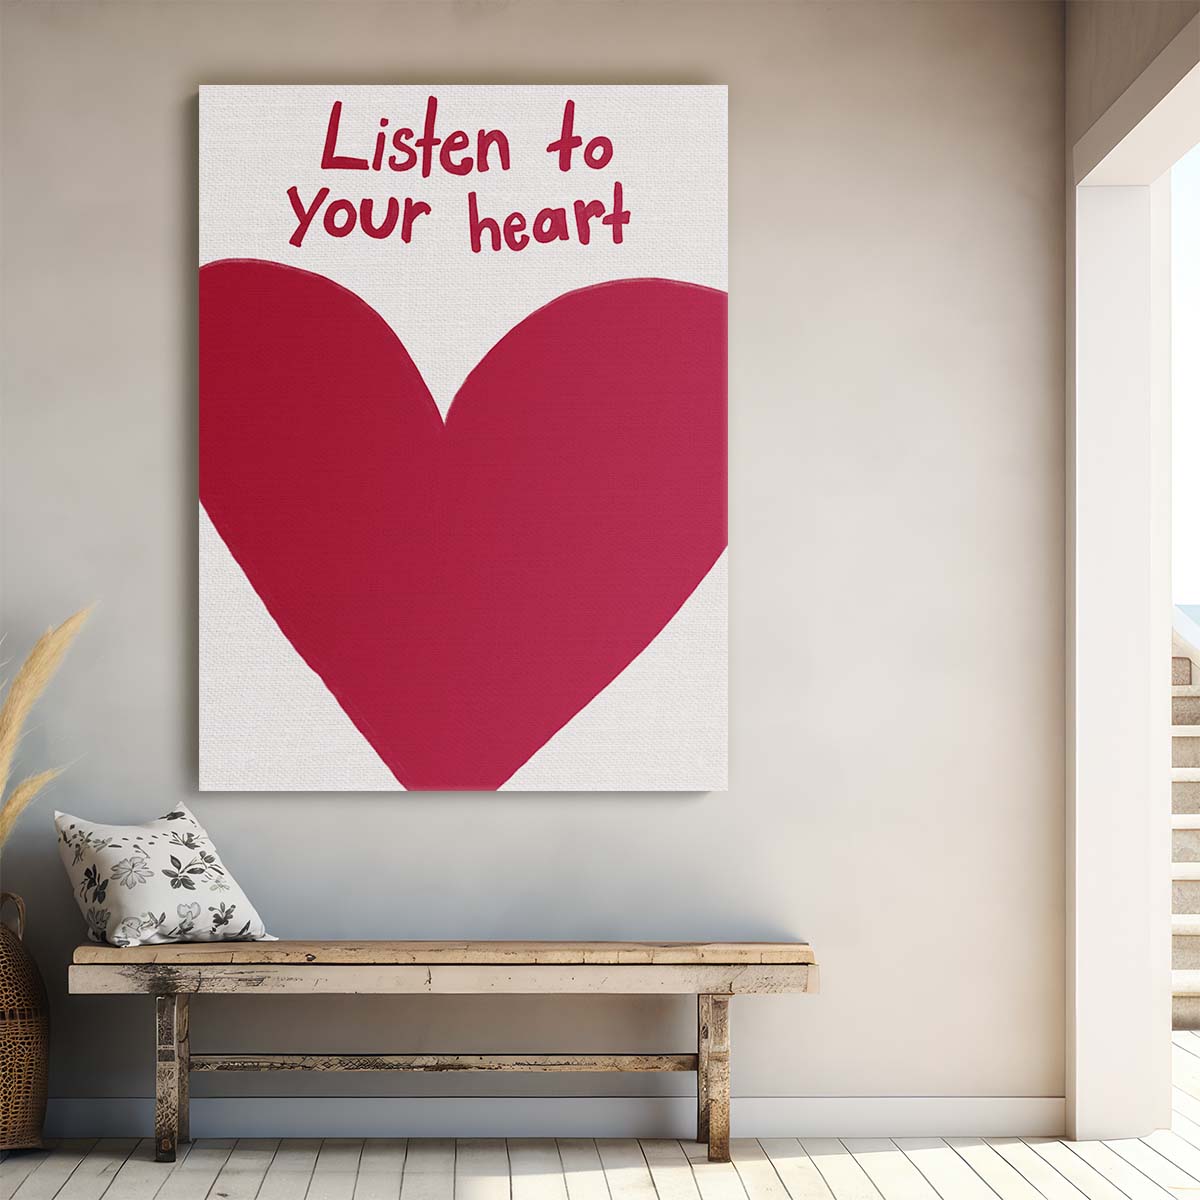 Romantic Inspirational Quote Illustration Listen to Your Heart by Luxuriance Designs, made in USA